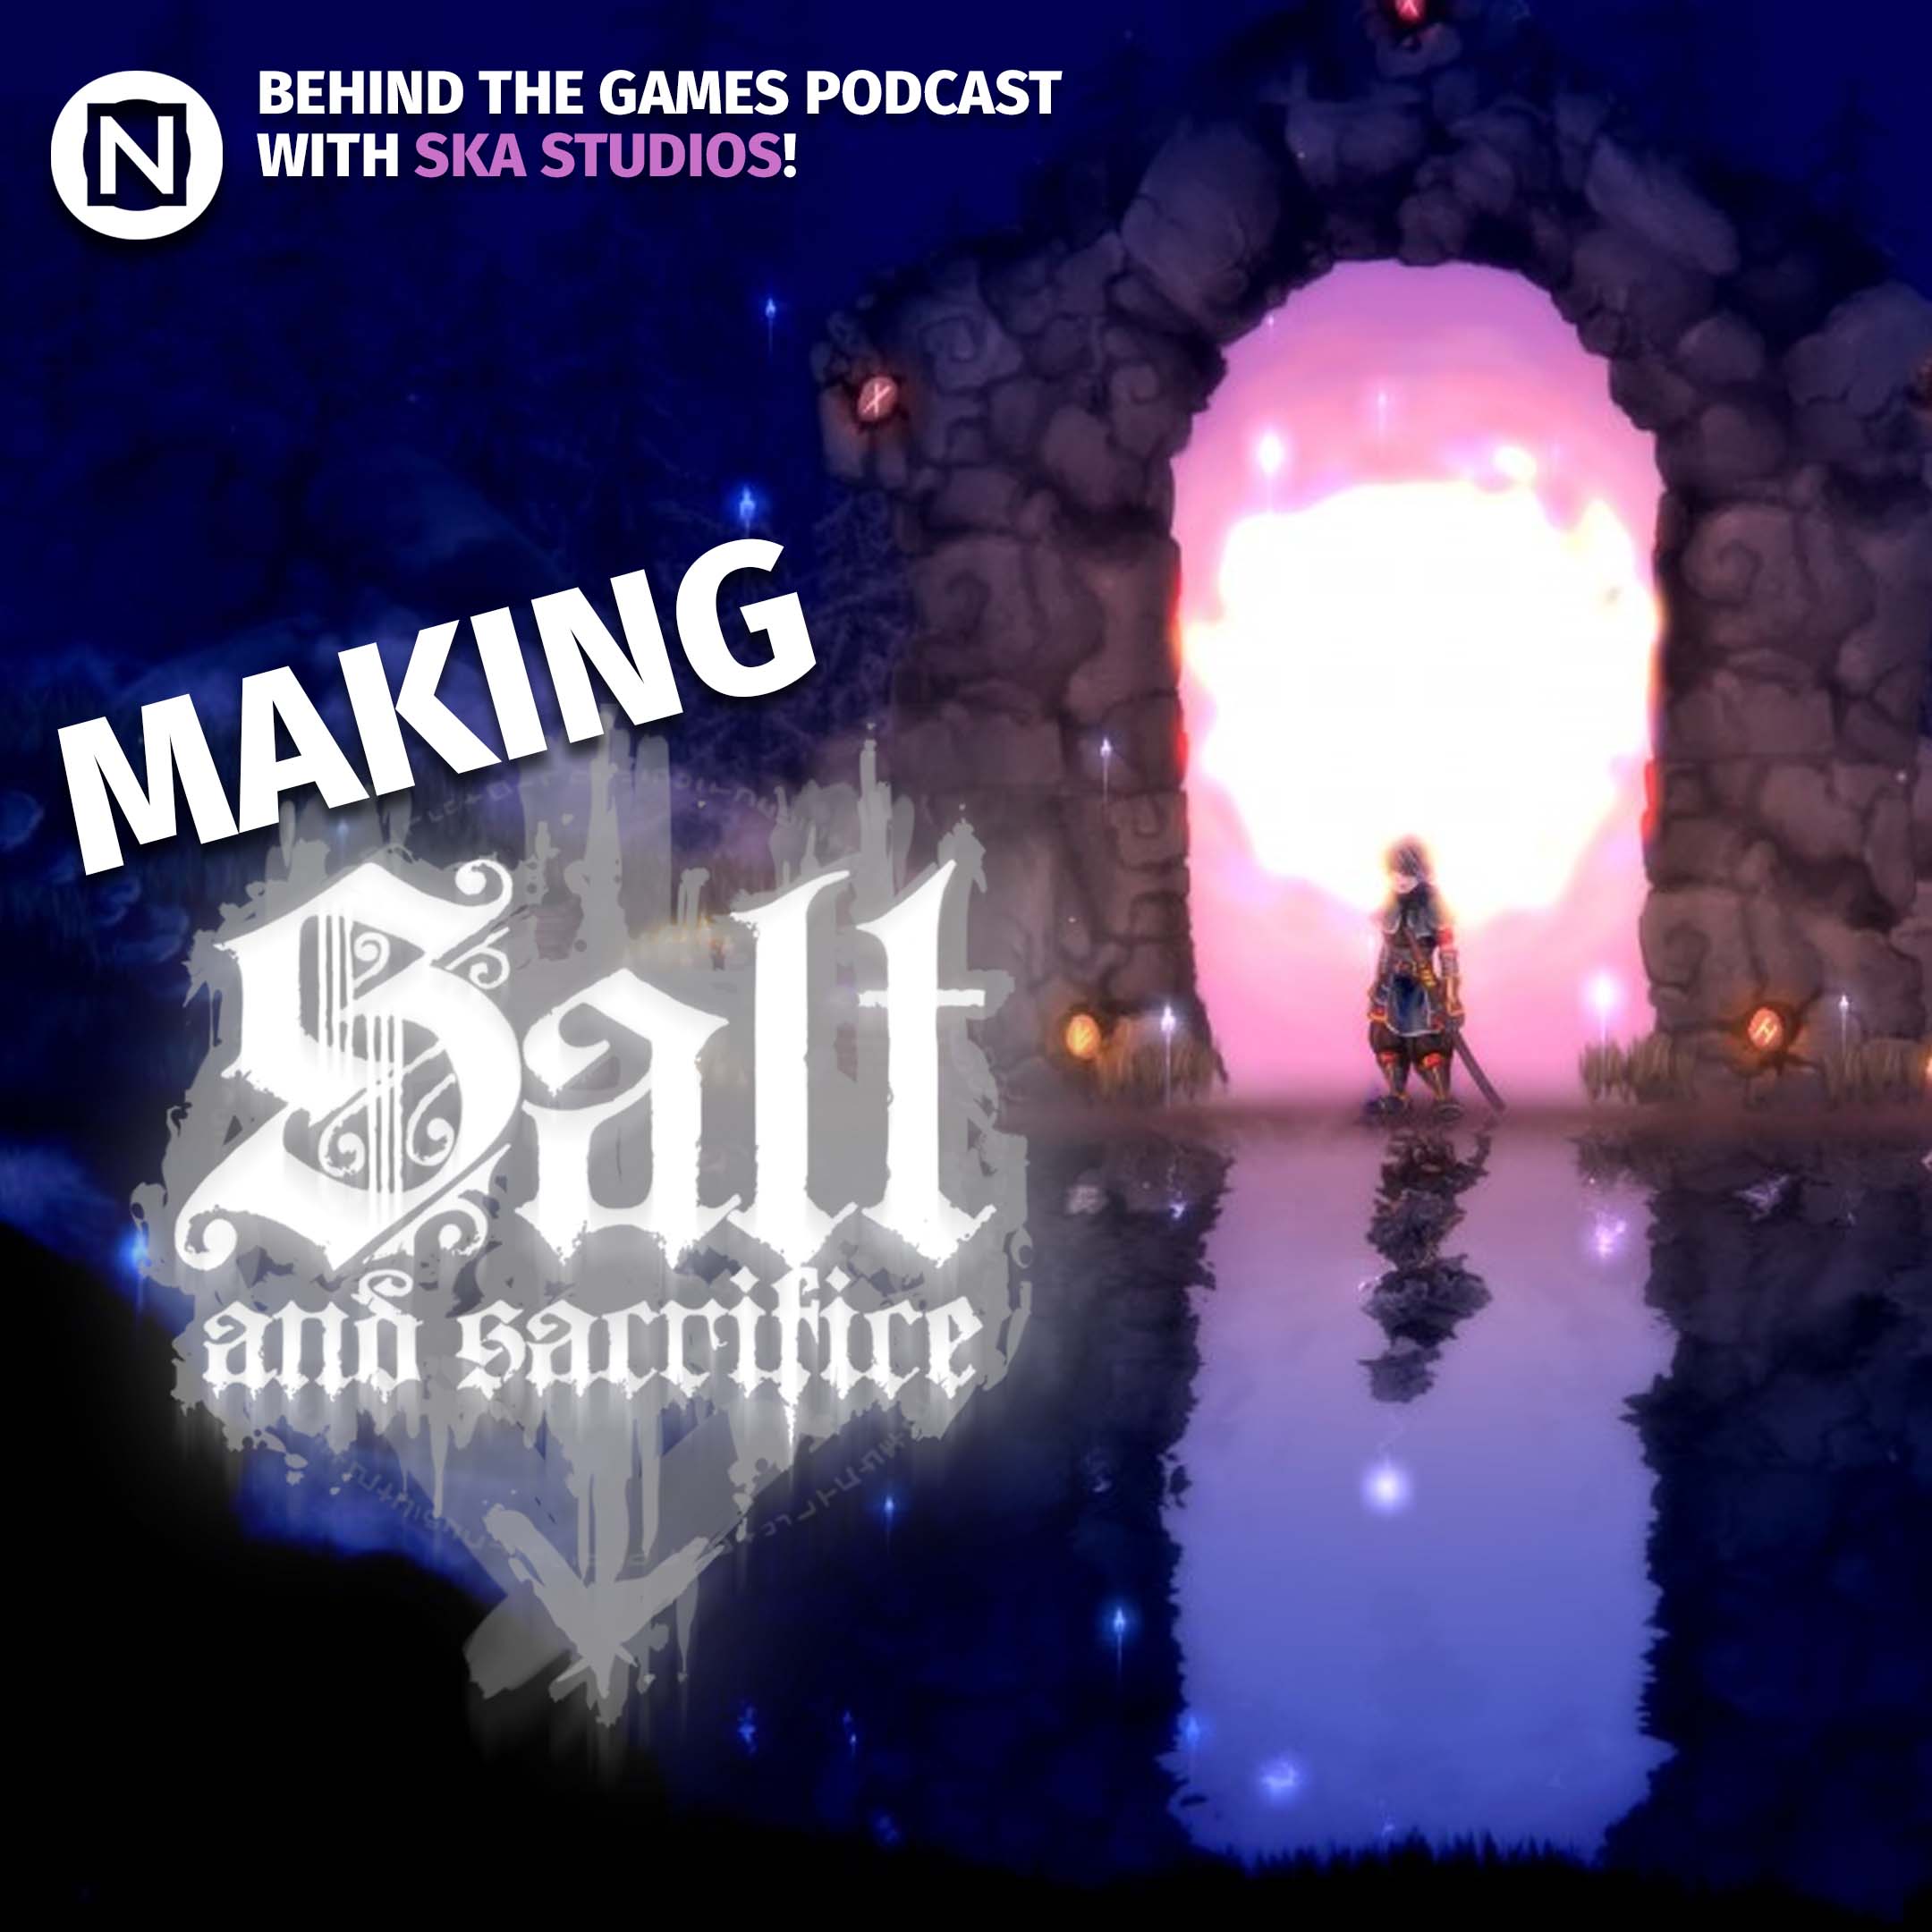 Making Salt and Sacrifice – Interview with Ska Studios on the New Overlords Behind The Games Podcast